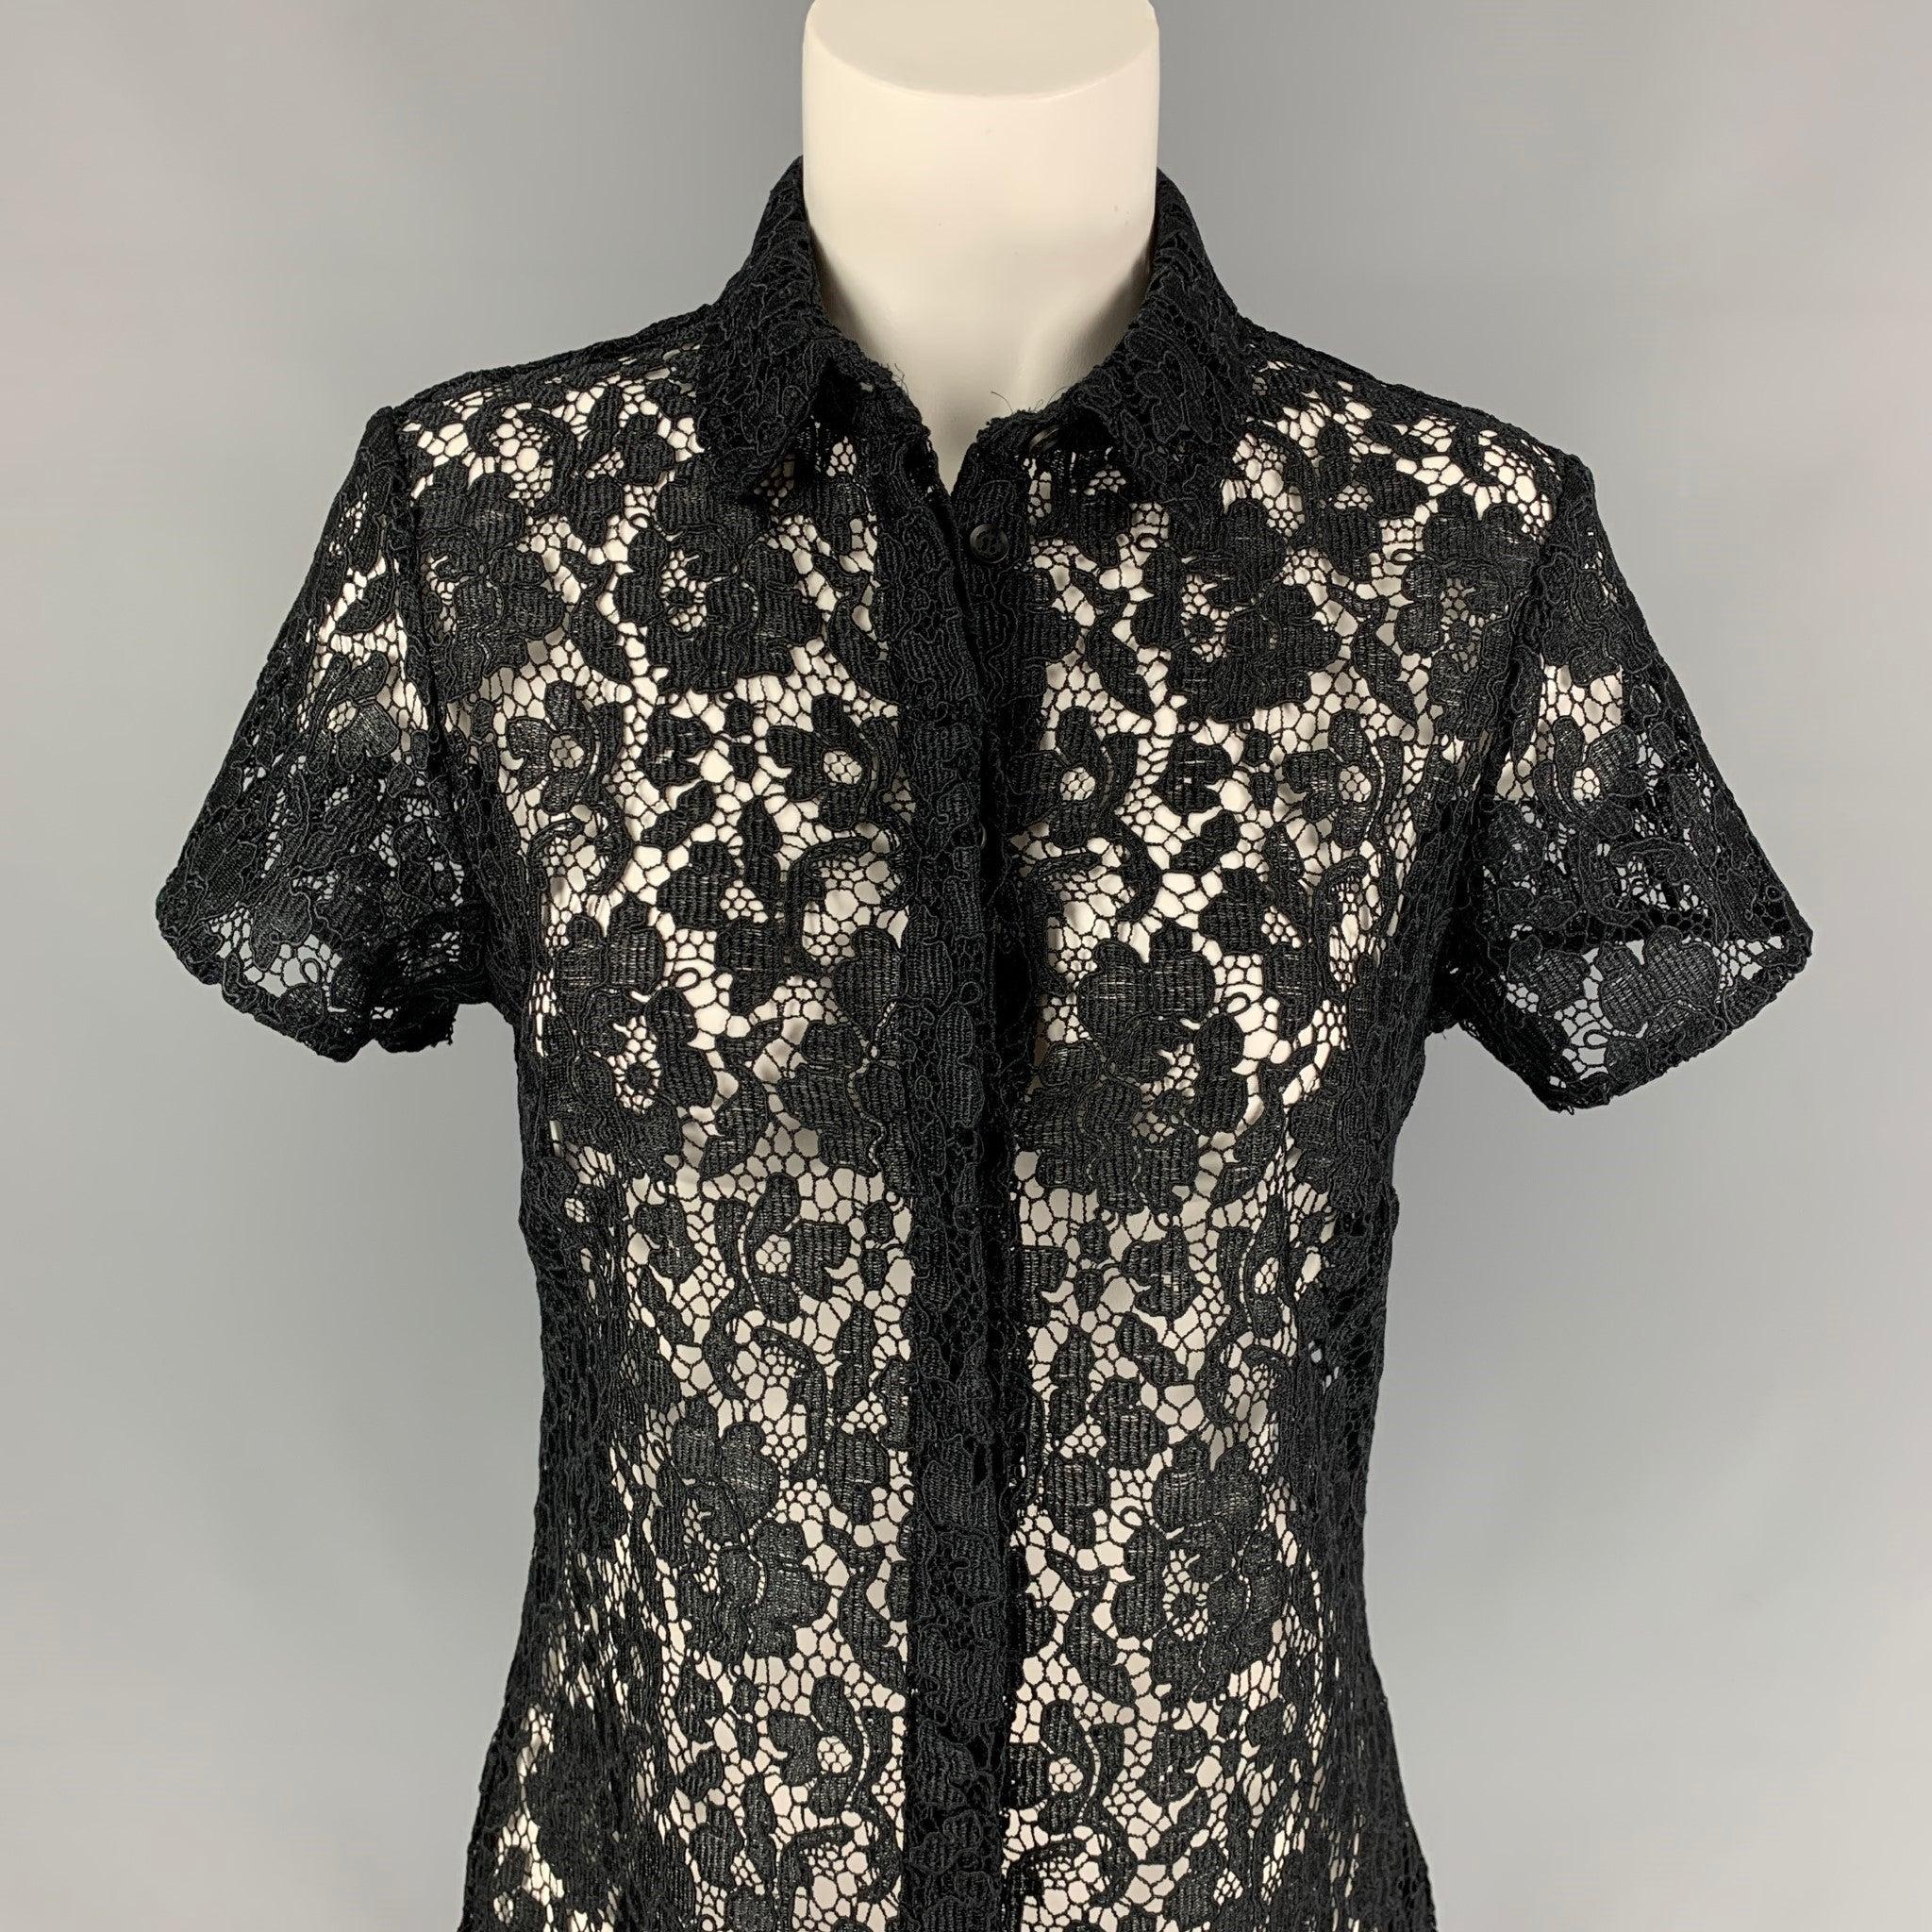 BURBERRY PRORSUM dress top comes in a black guipure see through polyester featuring a spread collar and a buttoned closure. Made in Italy.
Excellent
Pre-Owned Condition. 

Marked:   42 

Measurements: 
 
Shoulder: 15.5 inches  Bust: 34 inches 